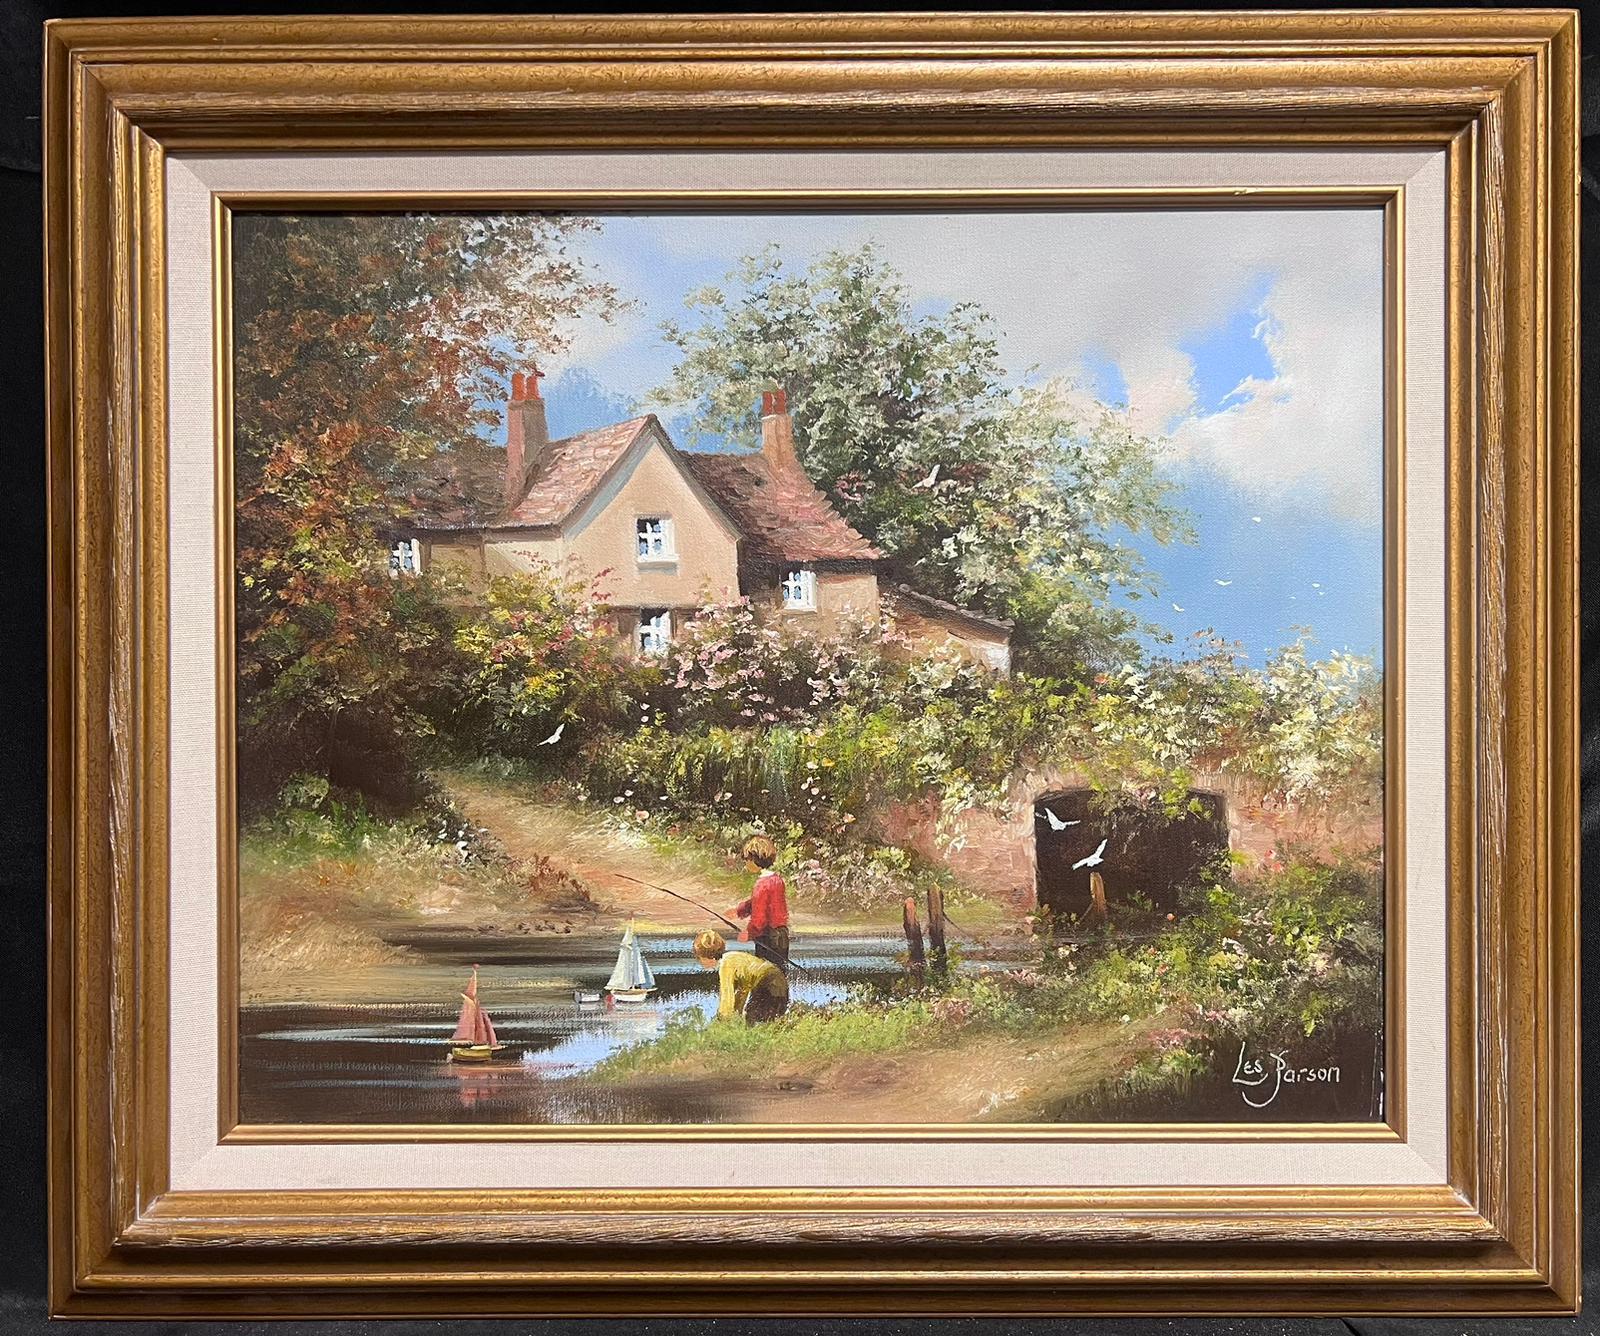 Les Parsons Landscape Painting - Traditional English Cornish Village Scene Children Playing in Stream by Cottage